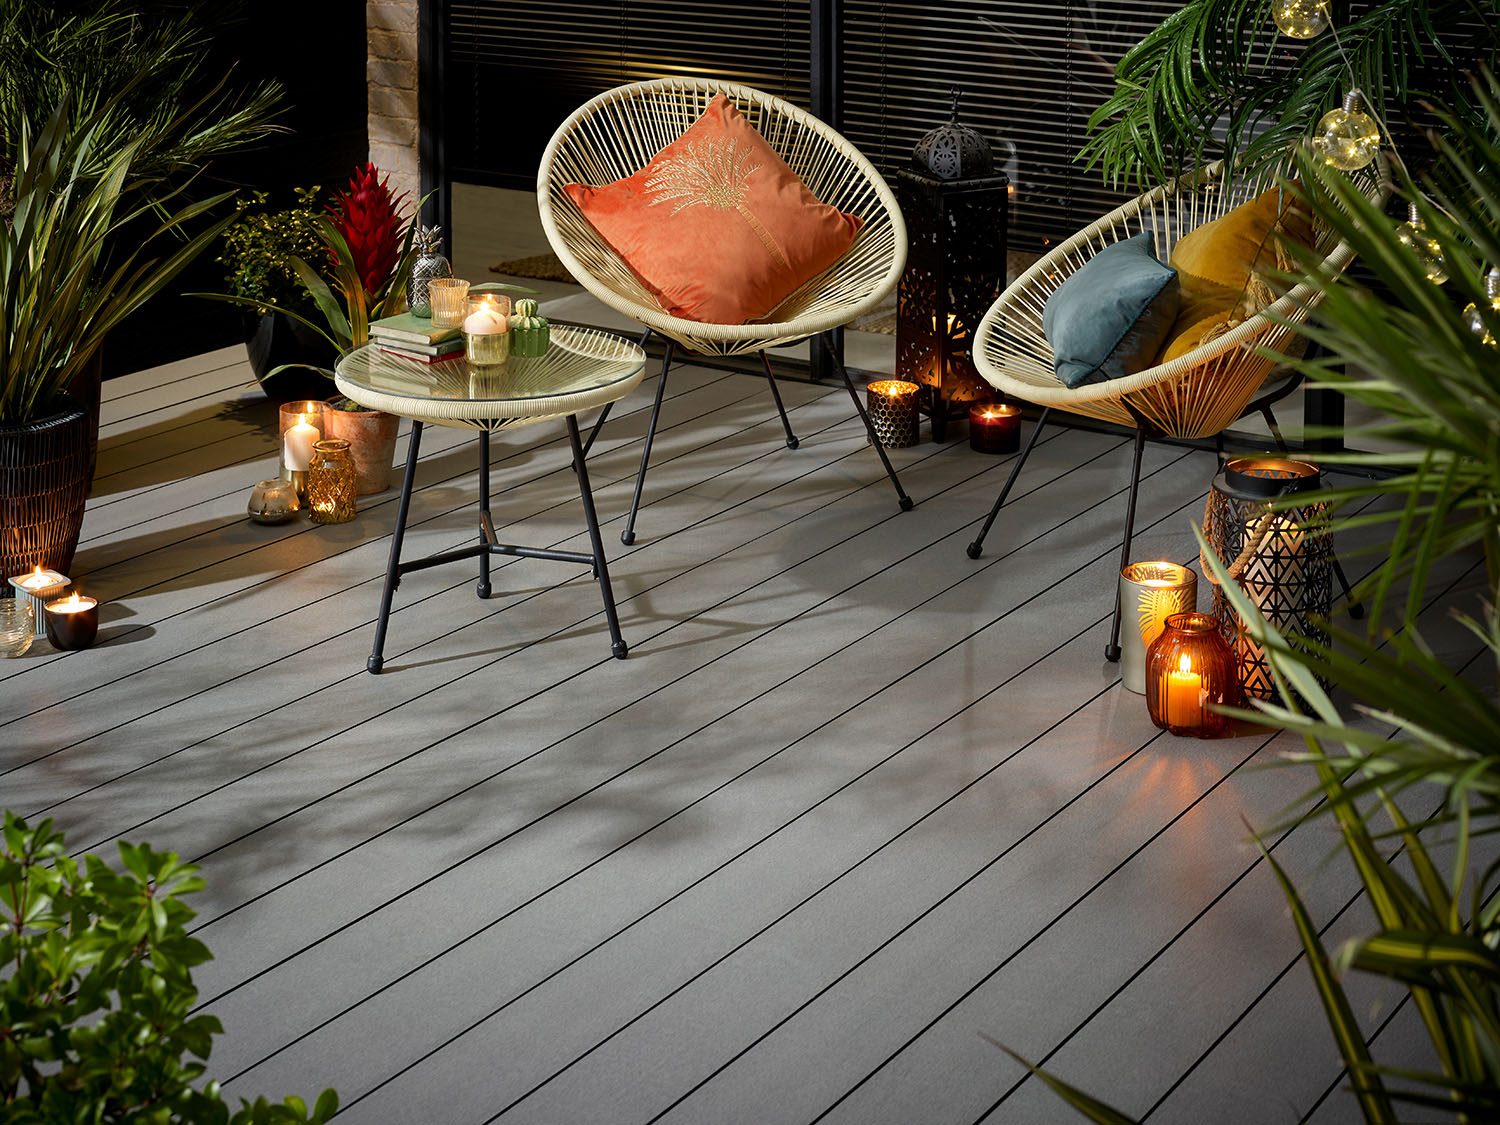 Grey wood grain decked courtyard with two cream chairs and table surrounded by plants at night with lit candles